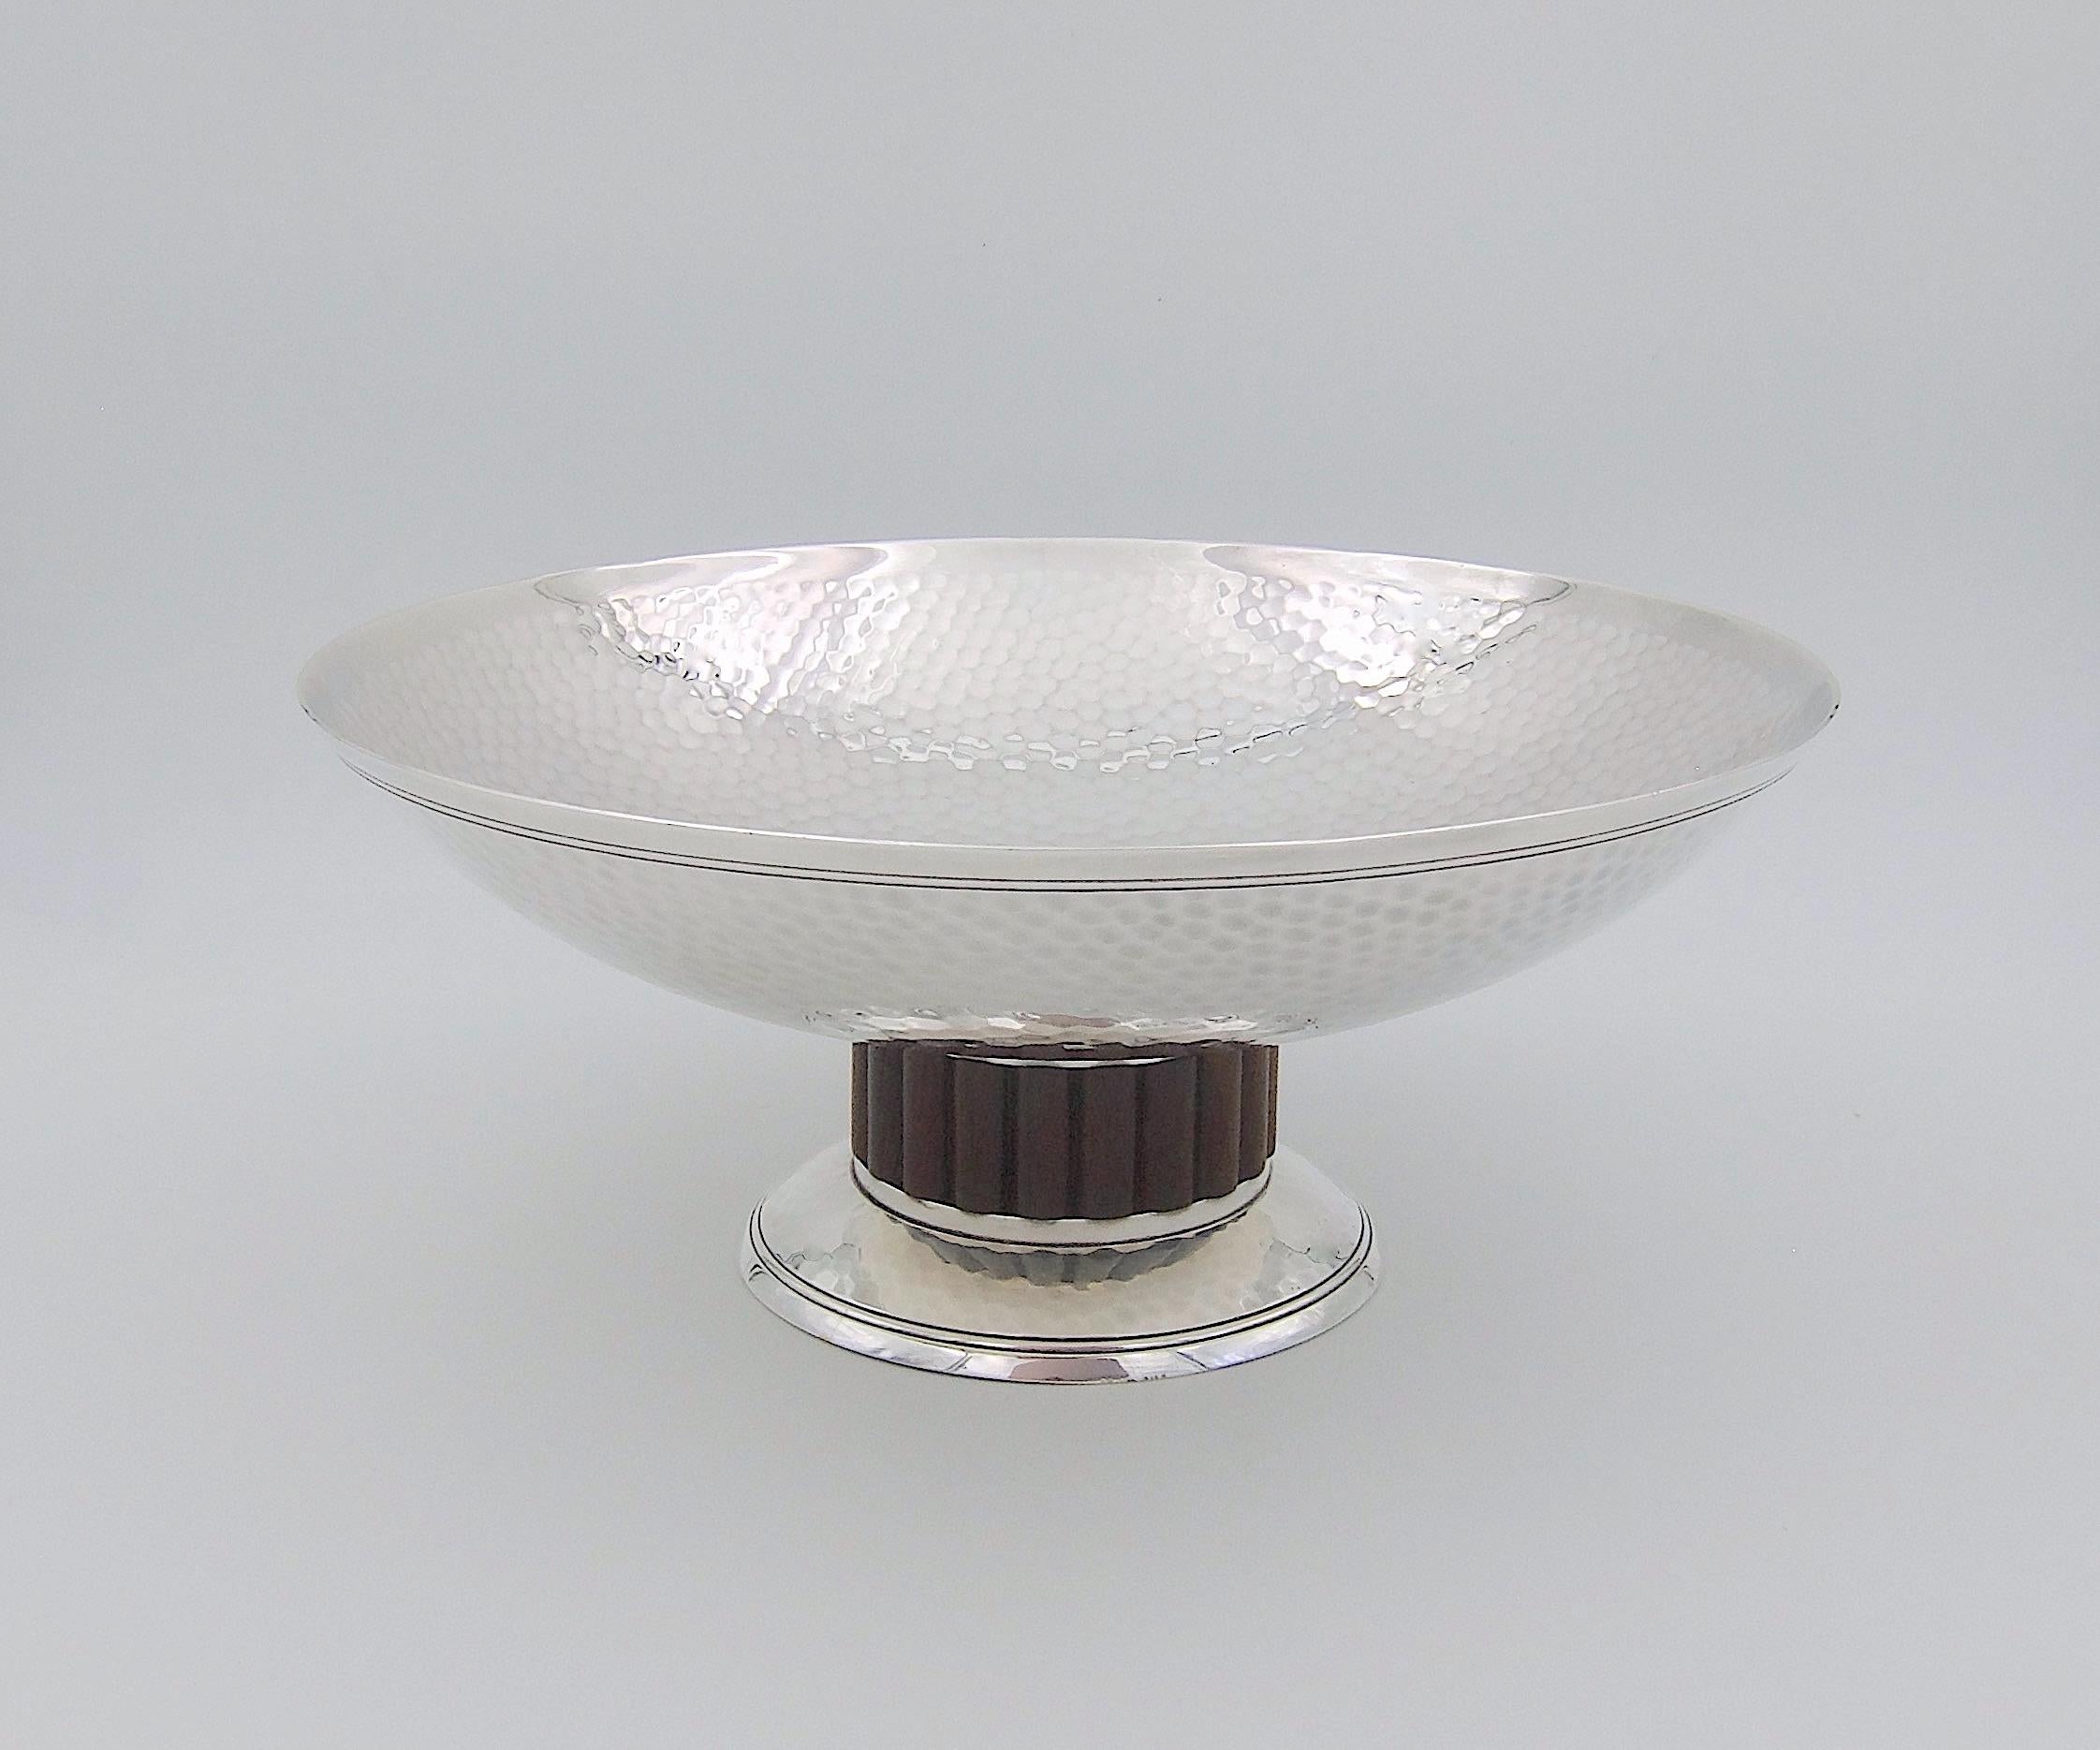 20th Century French Art Deco Pedestal Bowl in Silver-Plate by L'Orfèvrerie Brille of Paris